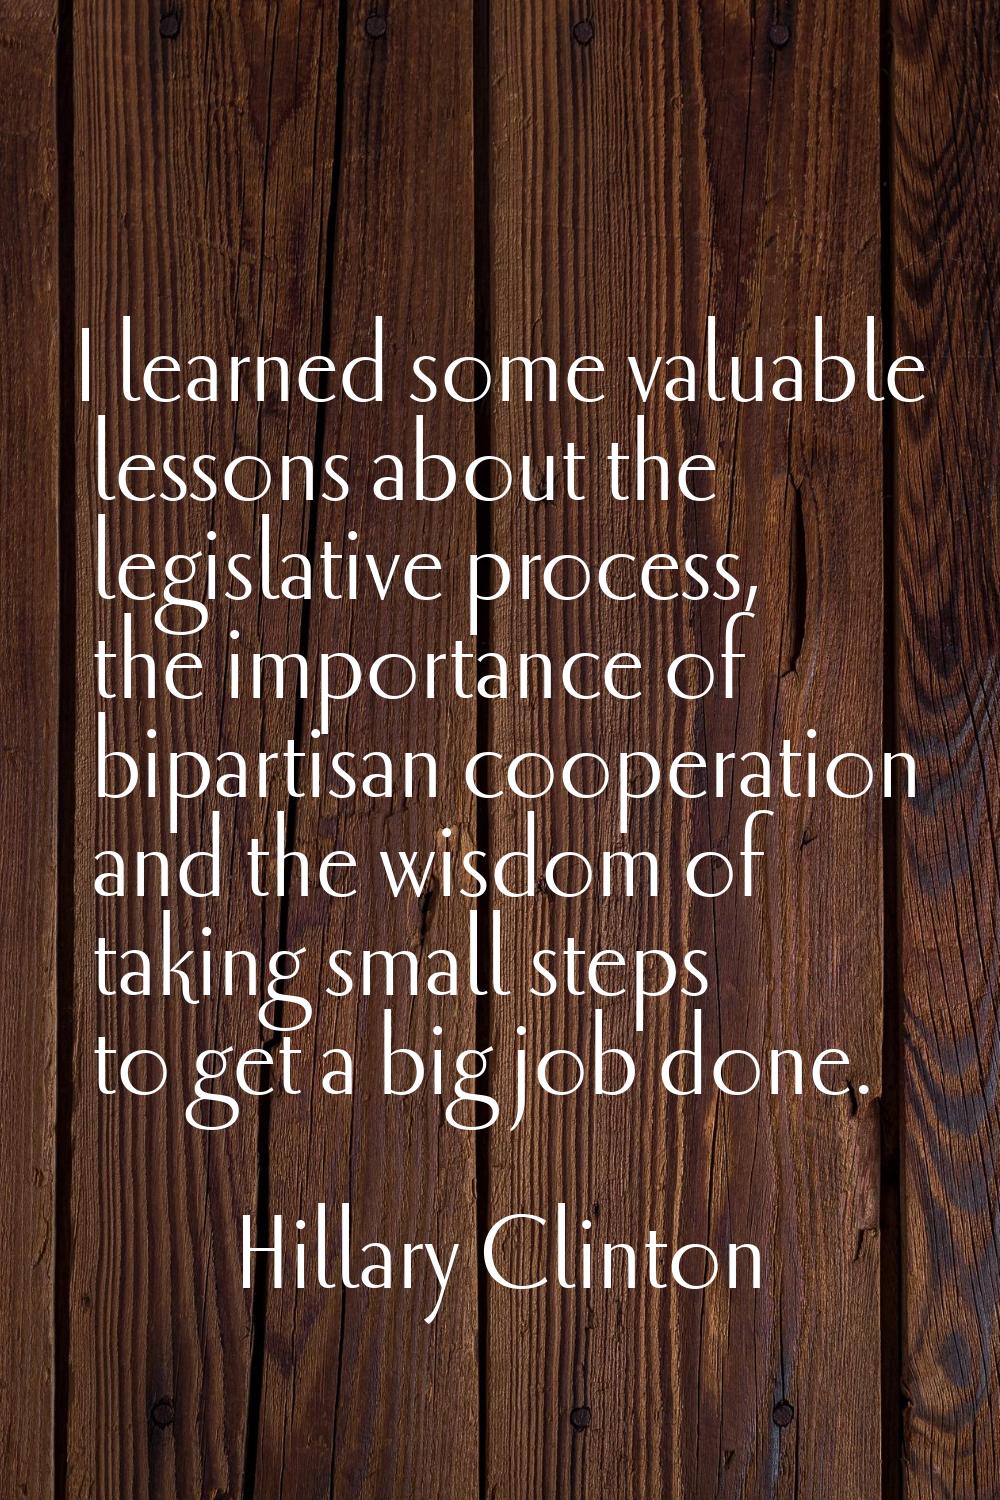 I learned some valuable lessons about the legislative process, the importance of bipartisan coopera